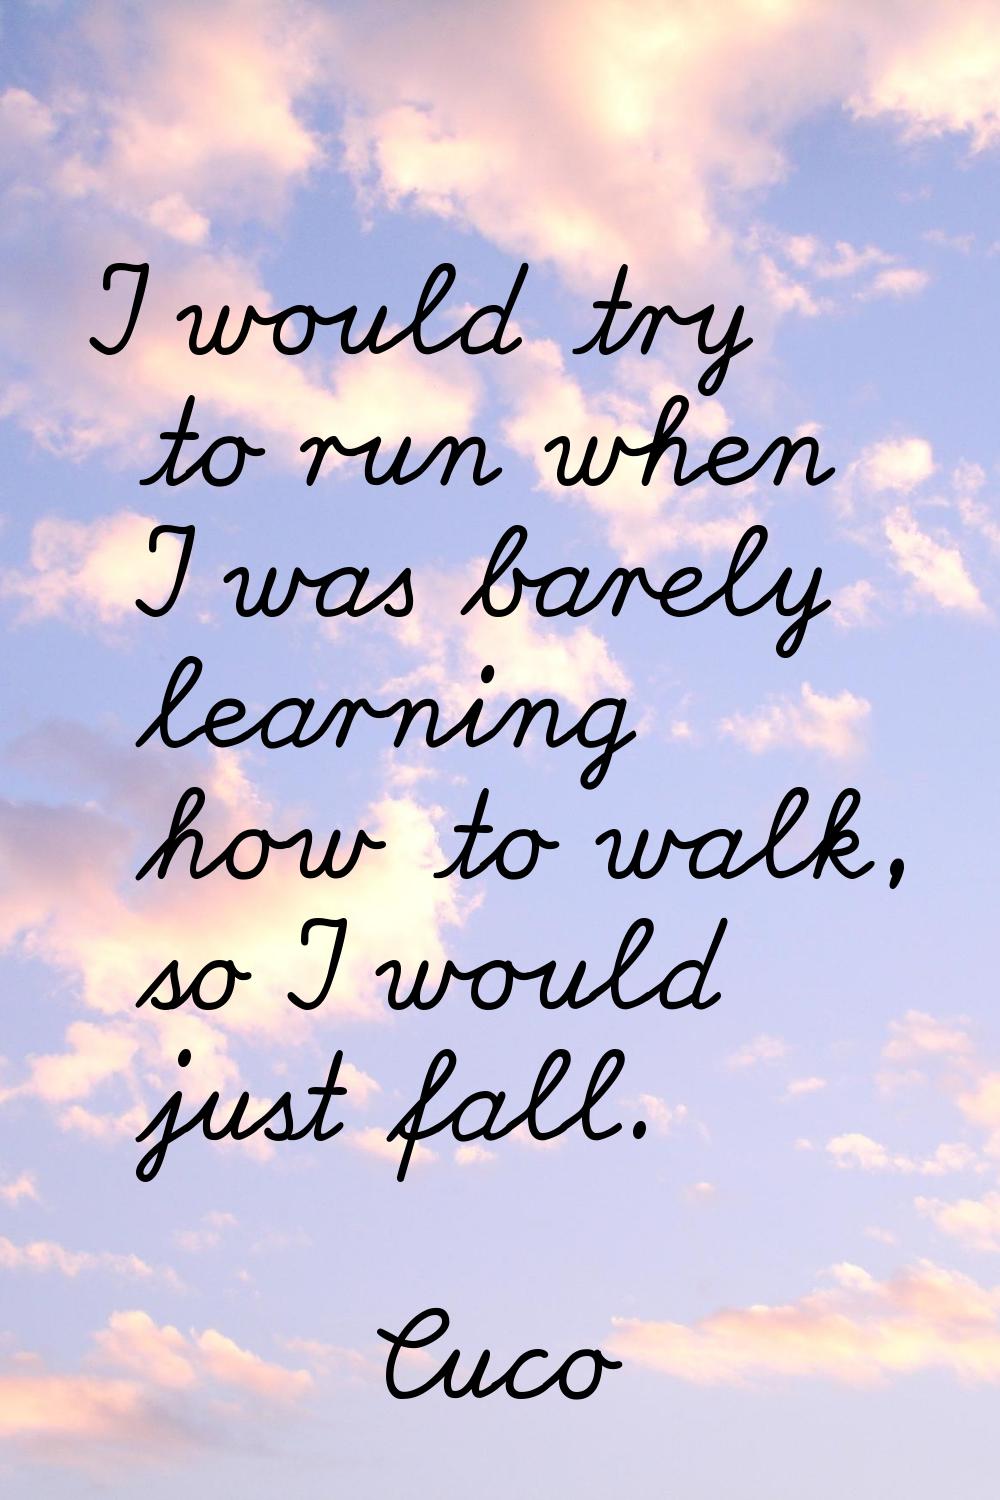 I would try to run when I was barely learning how to walk, so I would just fall.